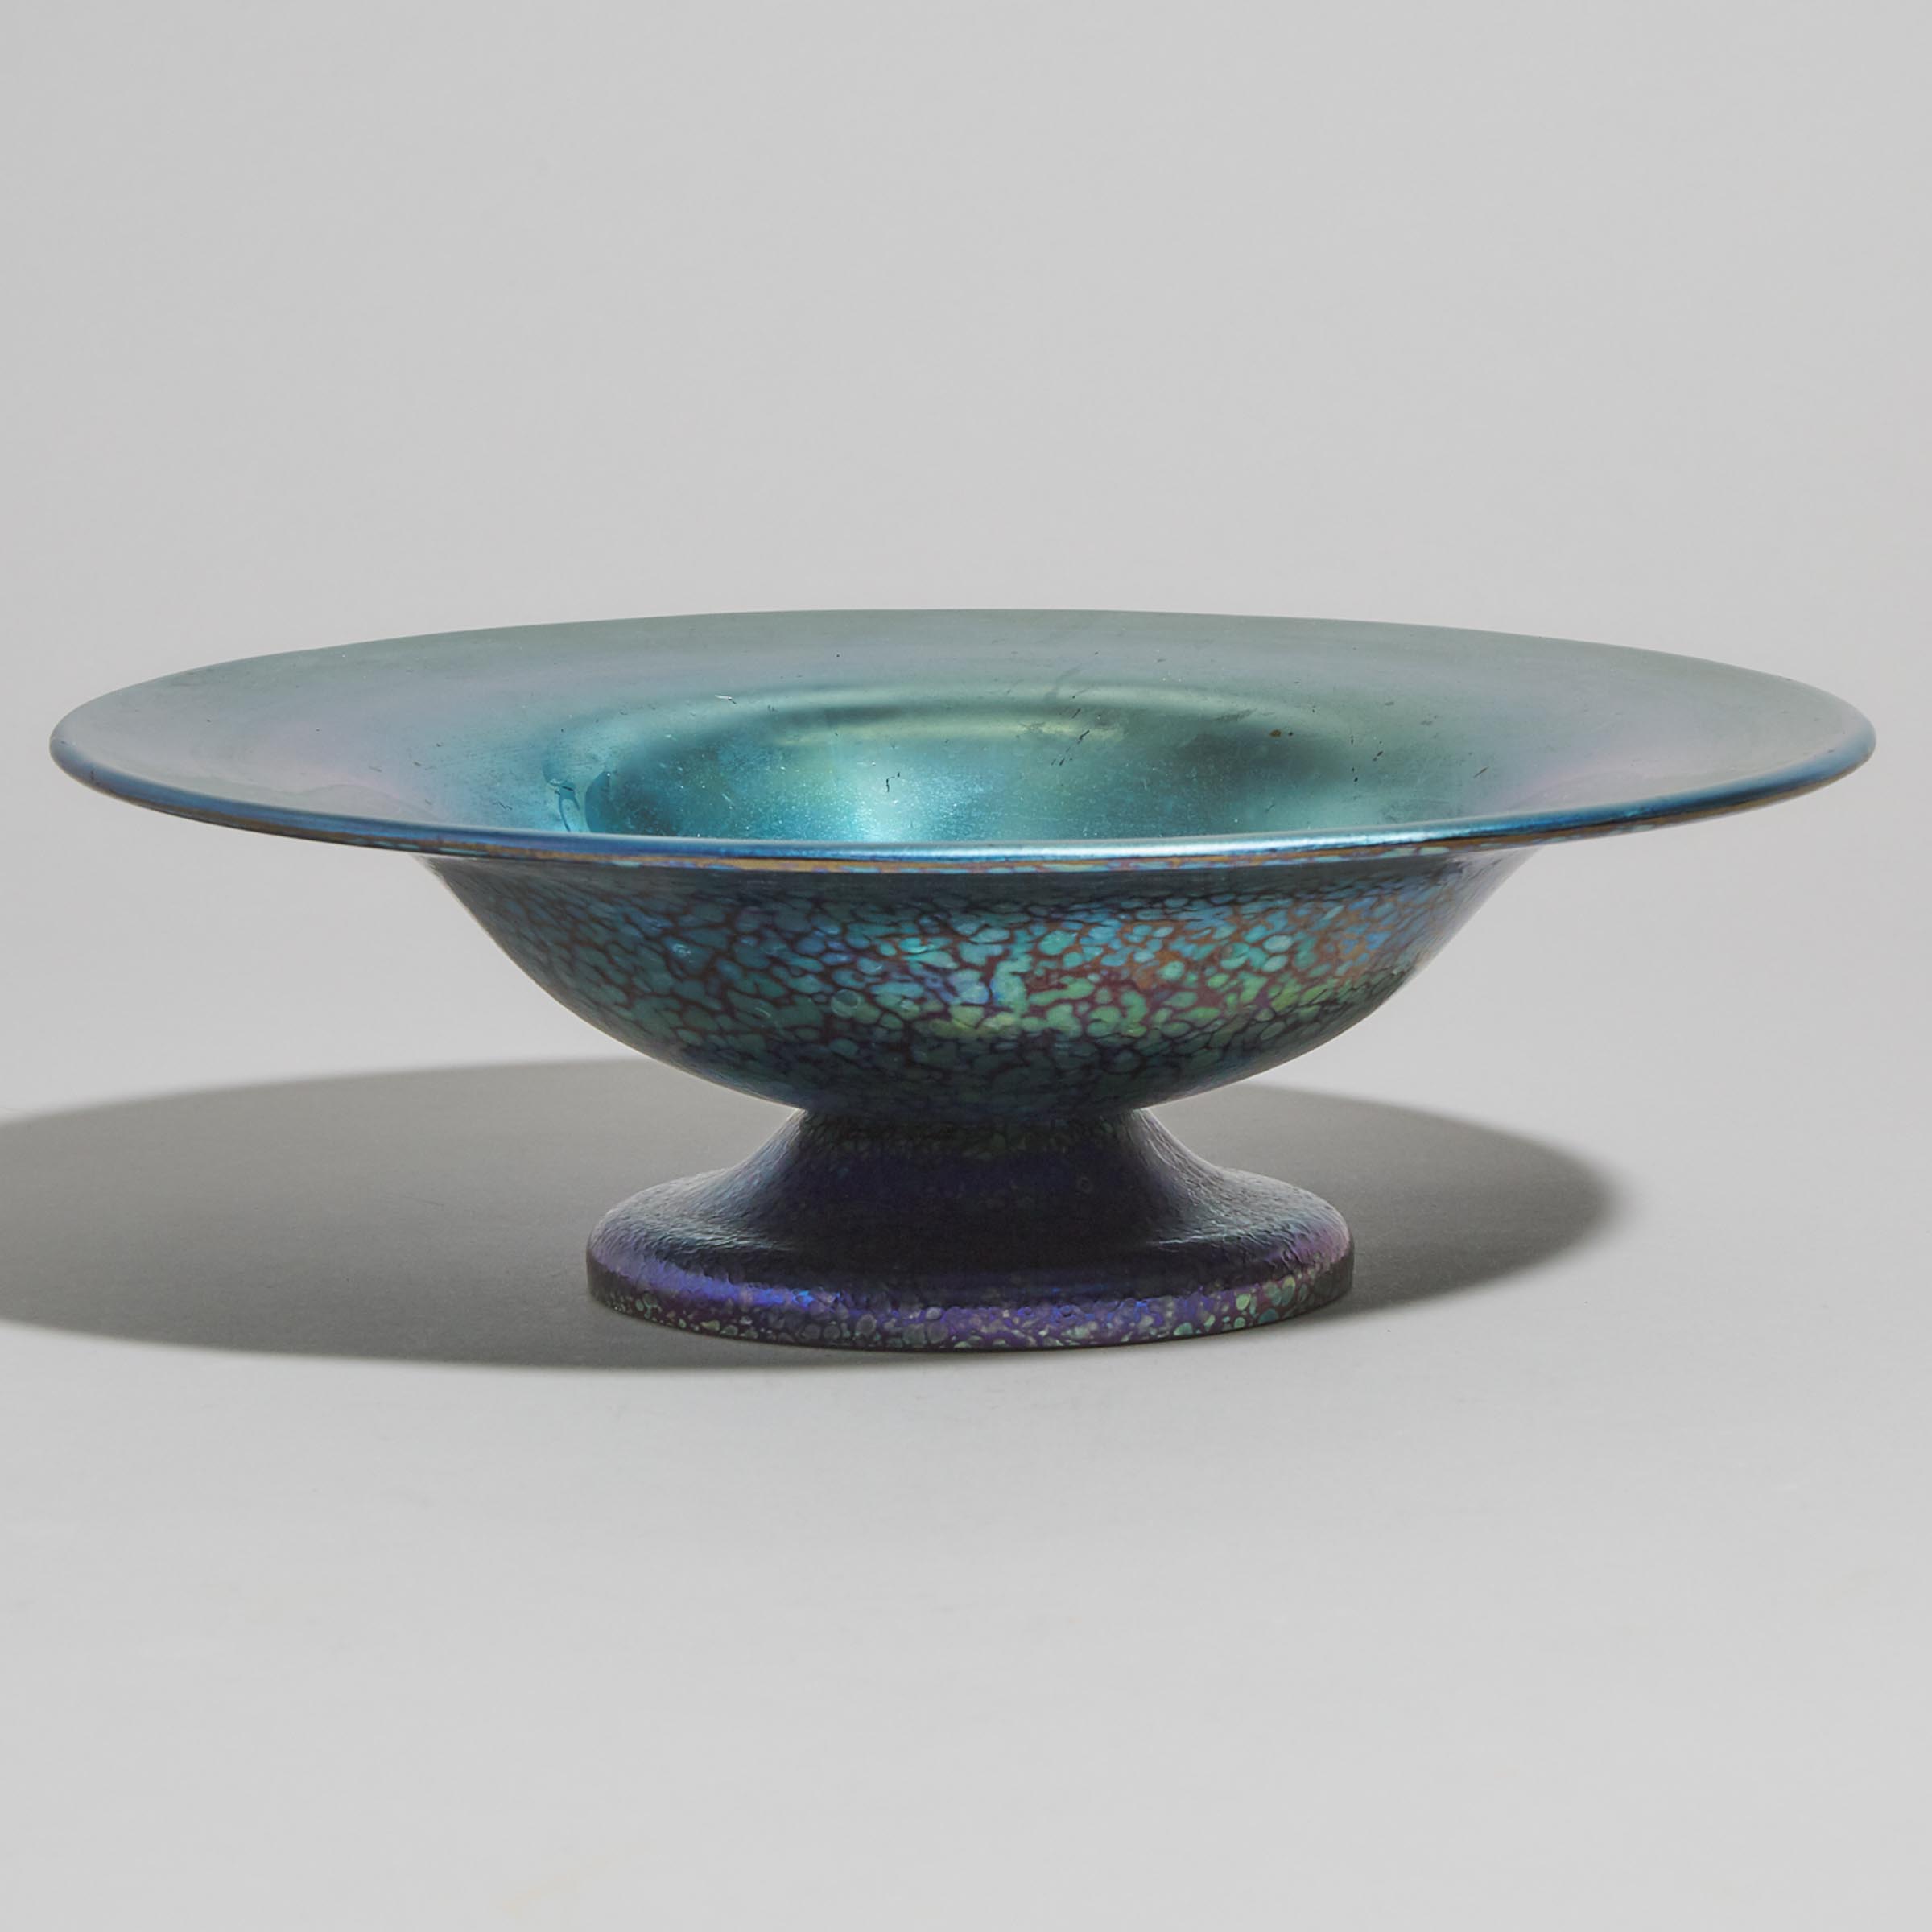 Austrian 'Papillon' Style Iridescent Blue Glass Footed Bowl, early 20th century